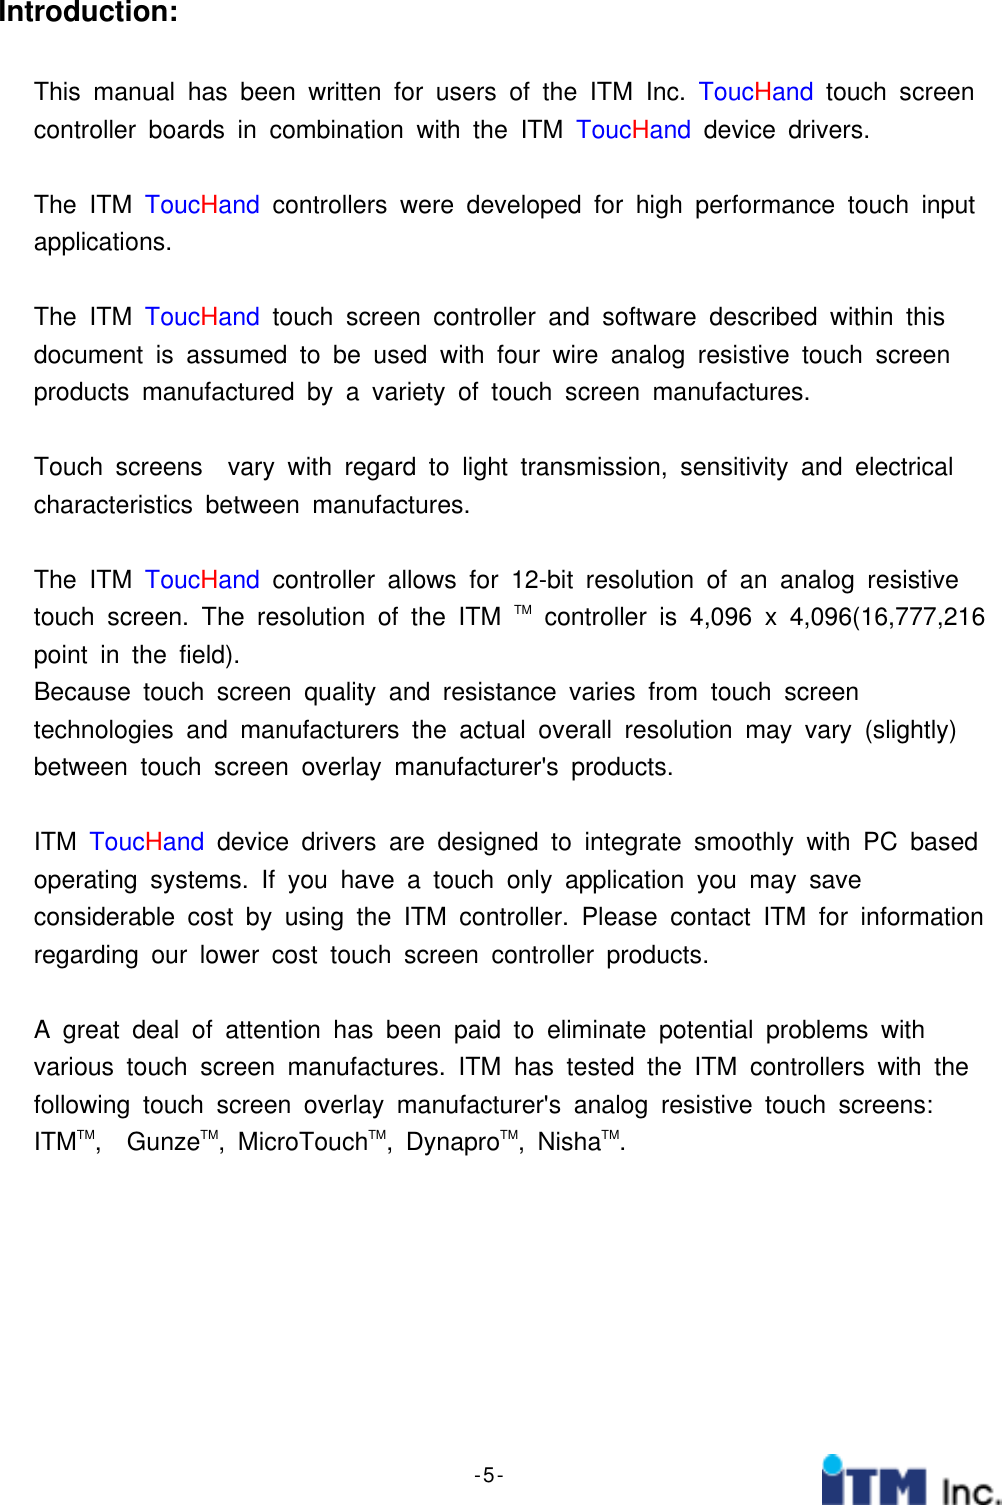 - 5 -Introduction:This manual has been written for users of the ITM Inc. ToucHand touch screencontroller boards in combination with the ITM ToucHand device drivers.The ITM ToucHand controllers were developed for high performance touch inputapplications.The ITM ToucHand touch screen controller and software described within thisdocument is assumed to be used with four wire analog resistive touch screenproducts manufactured by a variety of touch screen manufactures.Touch screens vary with regard to light transmission, sensitivity and electricalcharacteristics between manufactures.The ITM ToucHand controller allows for 12-bit resolution of an analog resistivetouch screen. The resolution of the ITM TM controller is 4,096 x 4,096(16,777,216point in the field).Because touch screen quality and resistance varies from touch screentechnologies and manufacturers the actual overall resolution may vary (slightly)between touch screen overlay manufacturer&apos;s products.ITM ToucHand device drivers are designed to integrate smoothly with PC basedoperating systems. If you have a touch only application you may saveconsiderable cost by using the ITM controller. Please contact ITM for informationregarding our lower cost touch screen controller products.A great deal of attention has been paid to eliminate potential problems withvarious touch screen manufactures. ITM has tested the ITM controllers with thefollowing touch screen overlay manufacturer&apos;s analog resistive touch screens:ITMTM,GunzeTM,MicroTouchTM, DynaproTM, NishaTM.